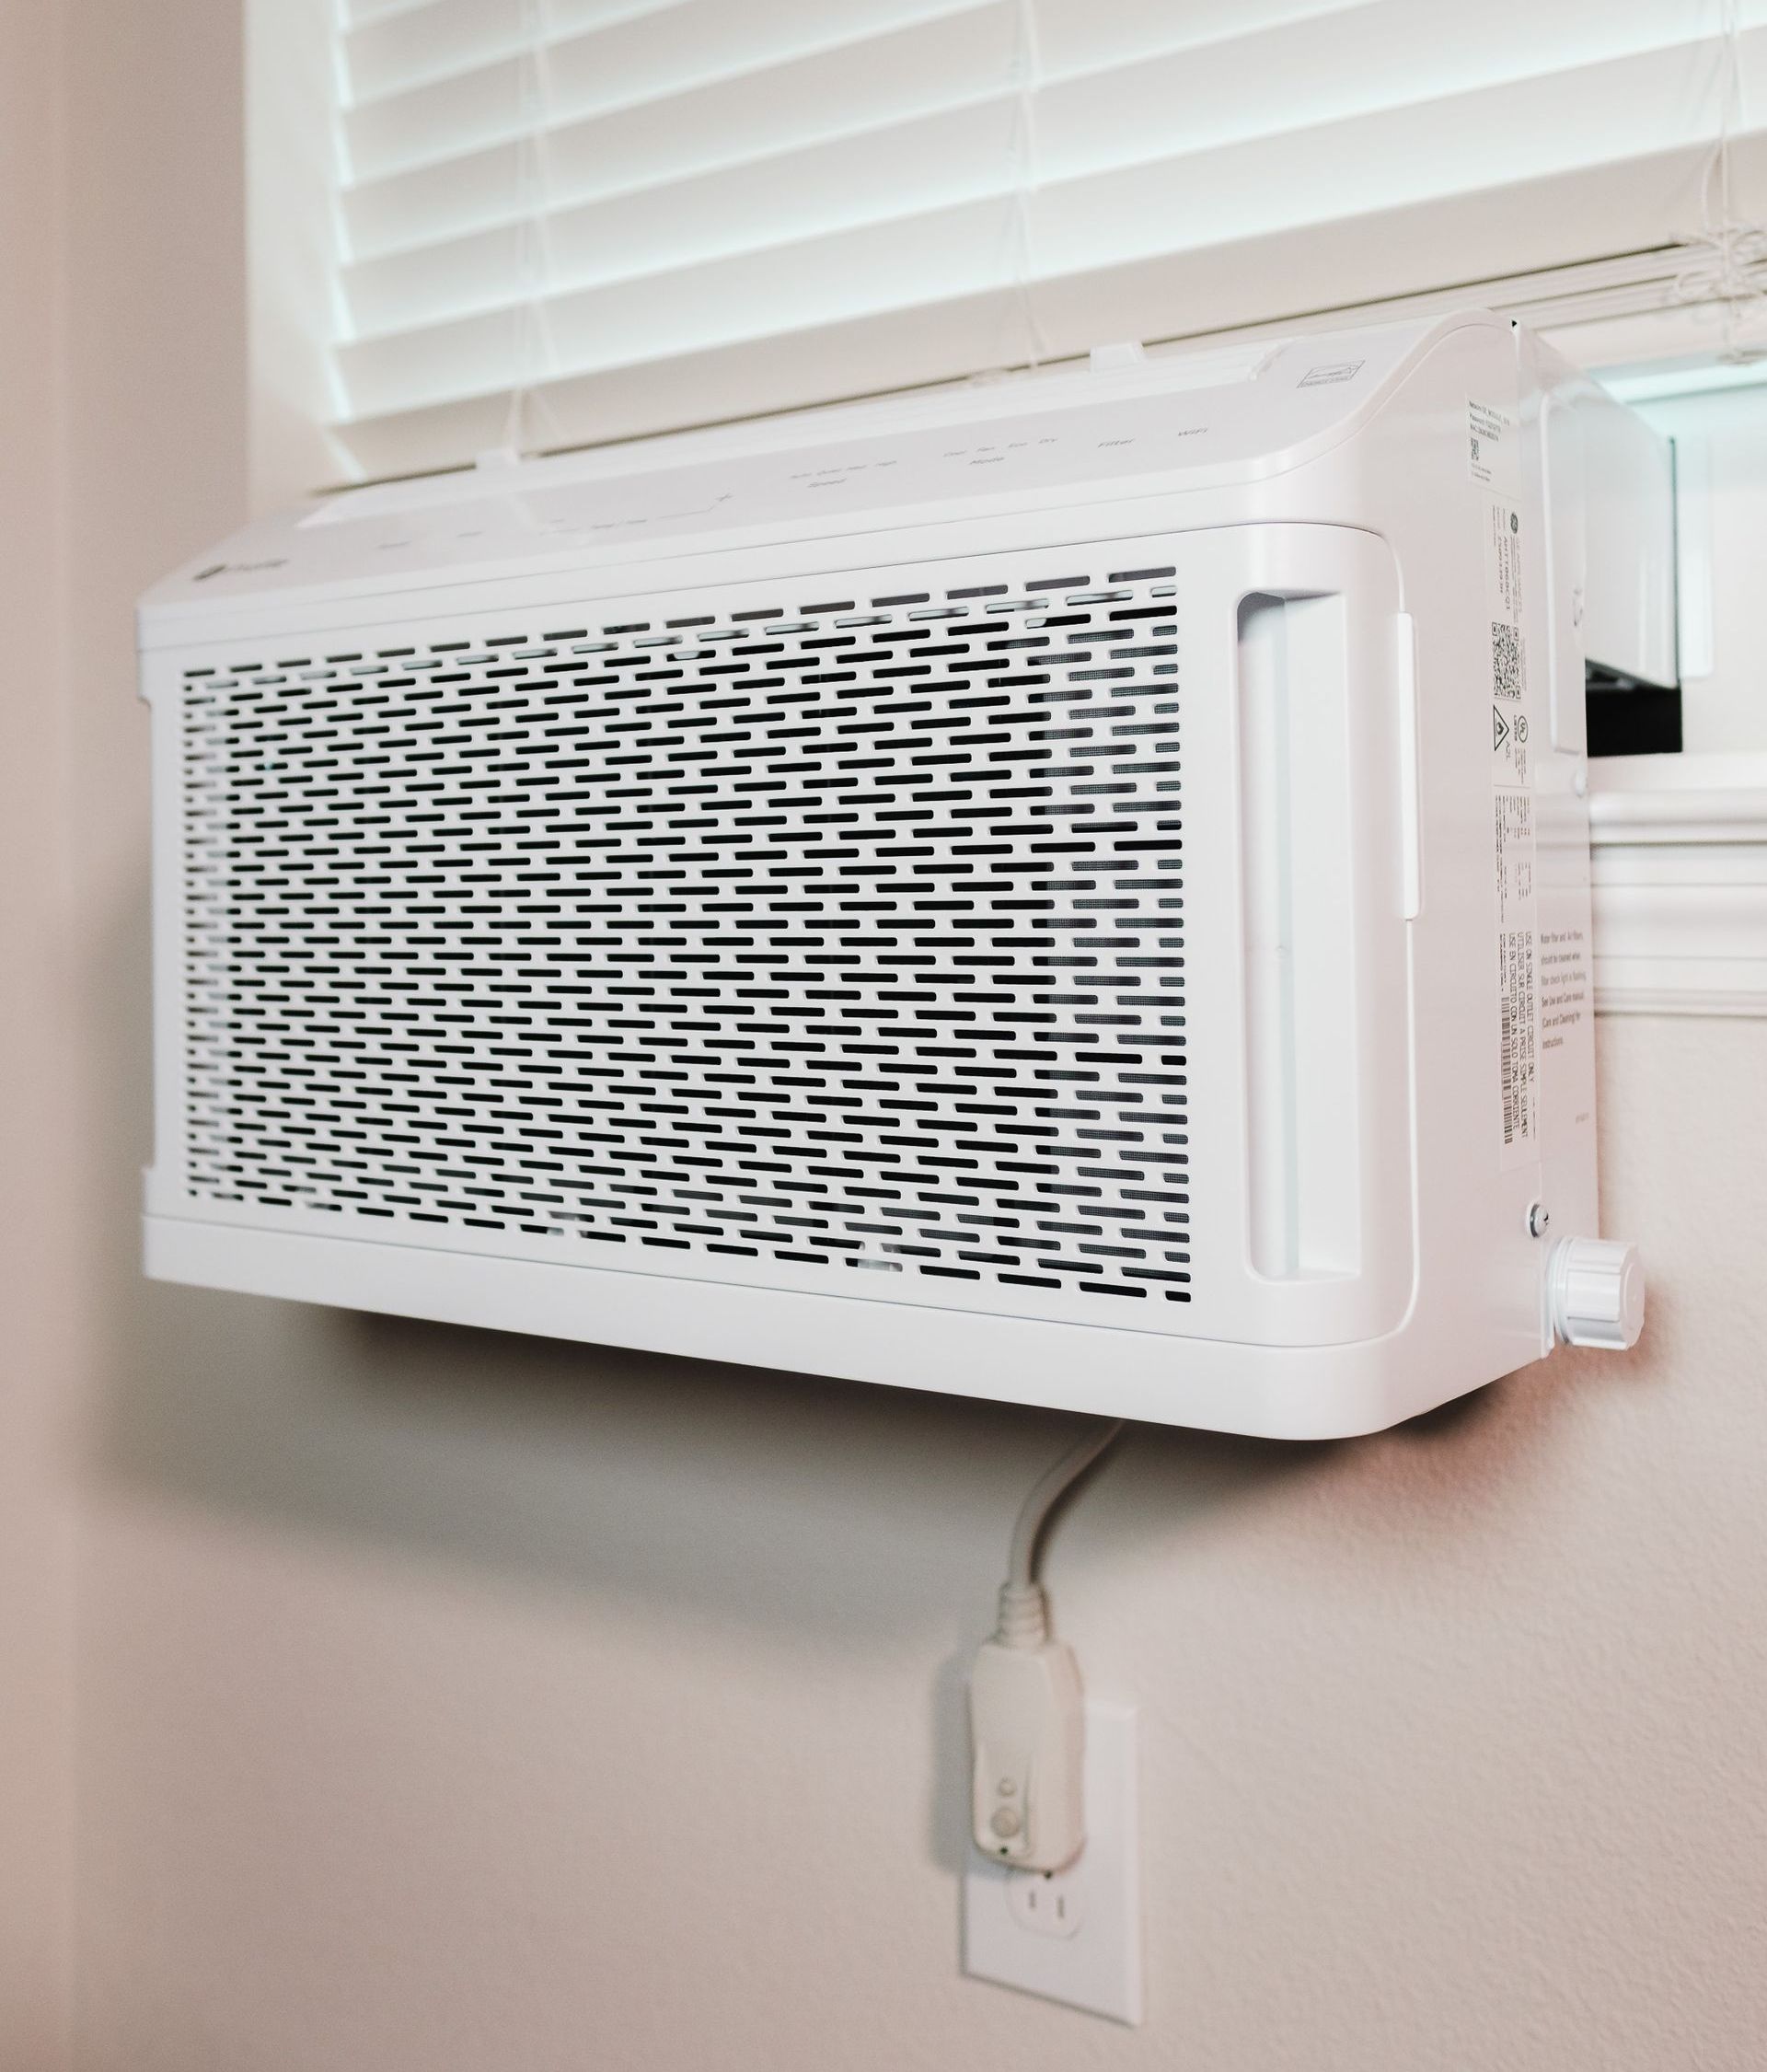 An image showing a PTAC (Packaged Terminal Air Conditioner) unit installed in a room.